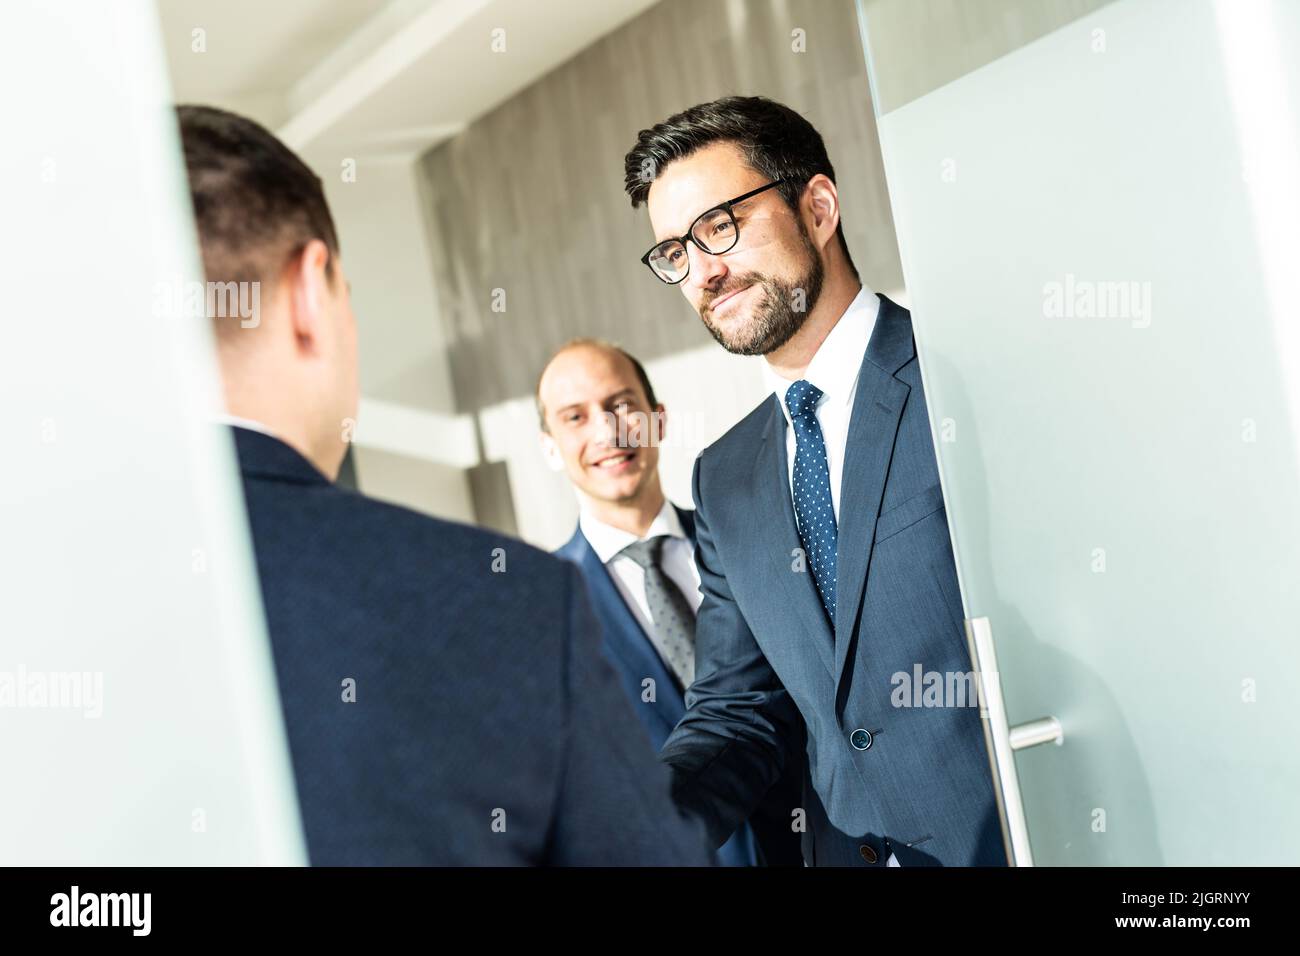 Group of confident business people greeting with a handshake at business meeting in modern office or closing the deal agreement by shaking hands. Stock Photo